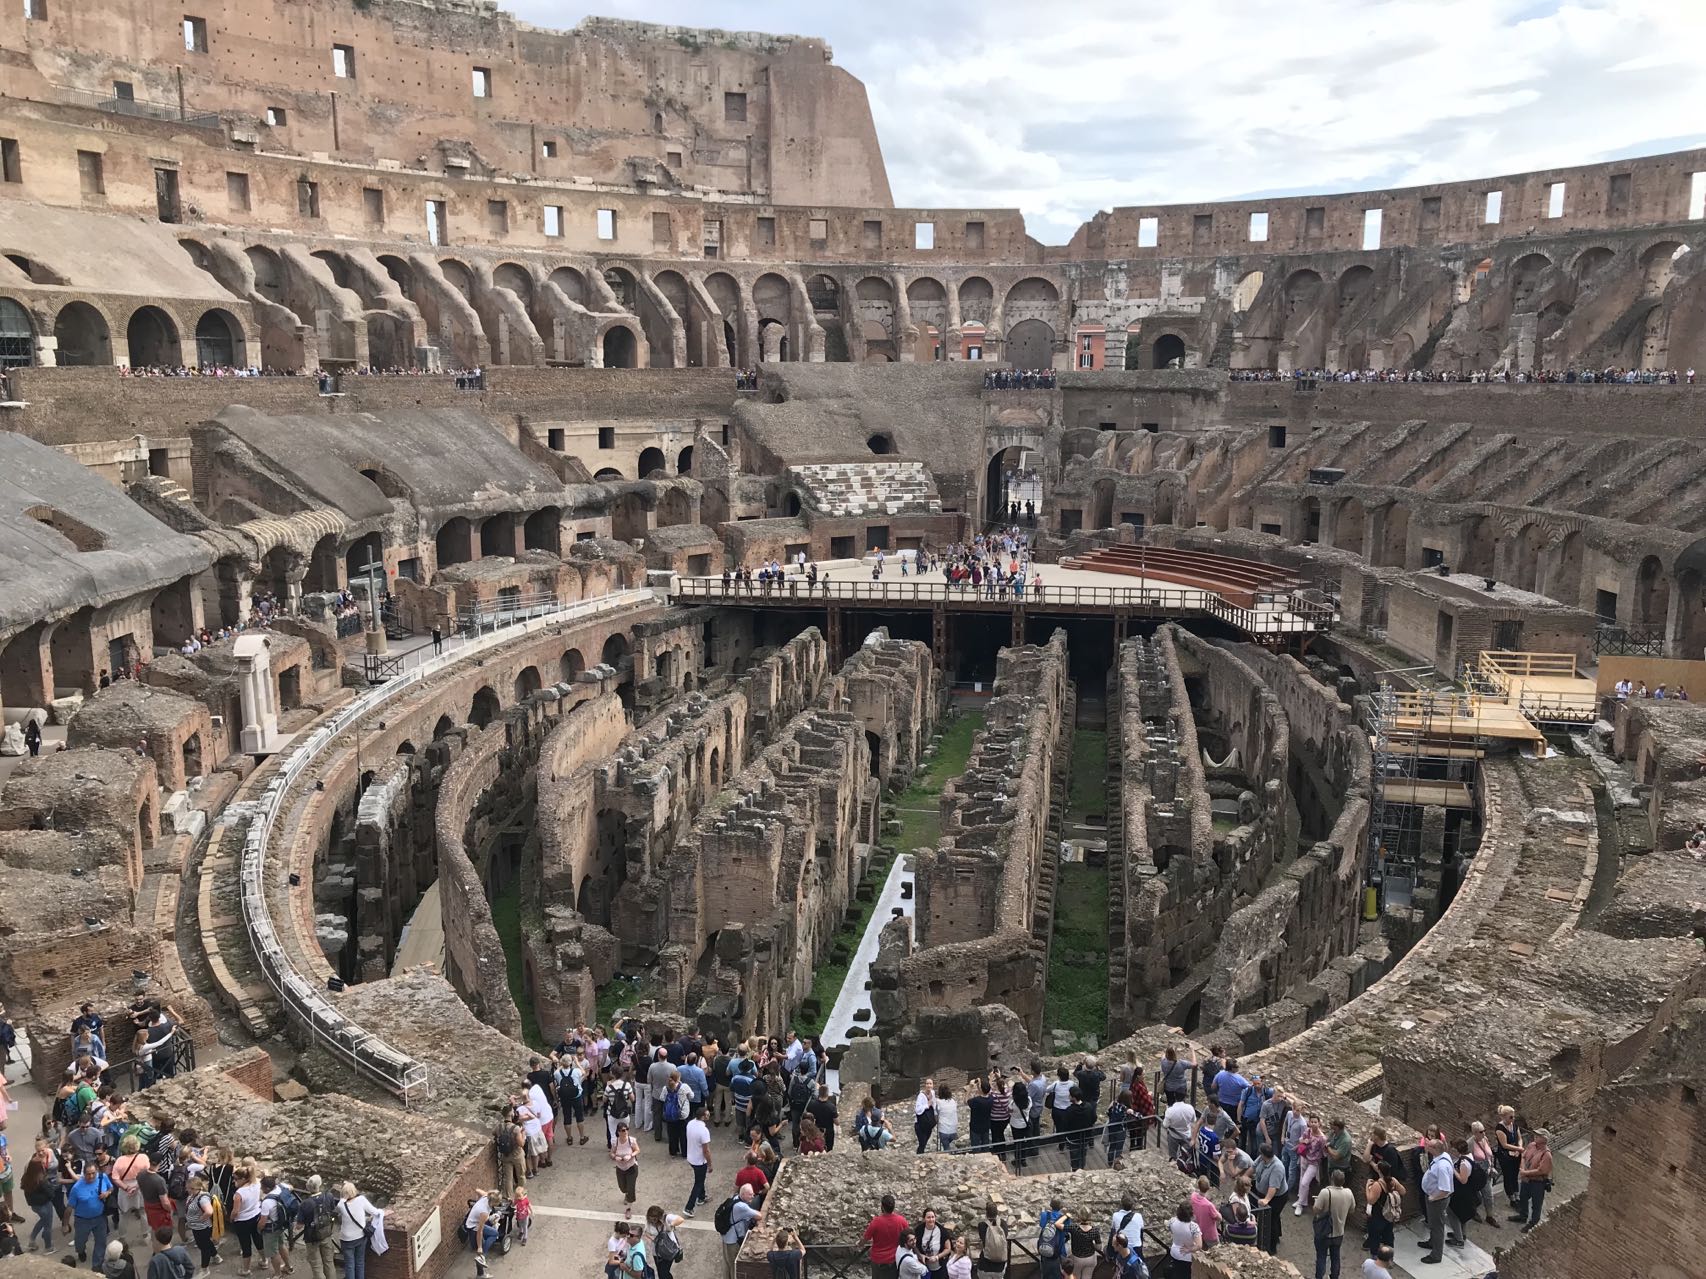 Guangneng's Rome, Colosseum